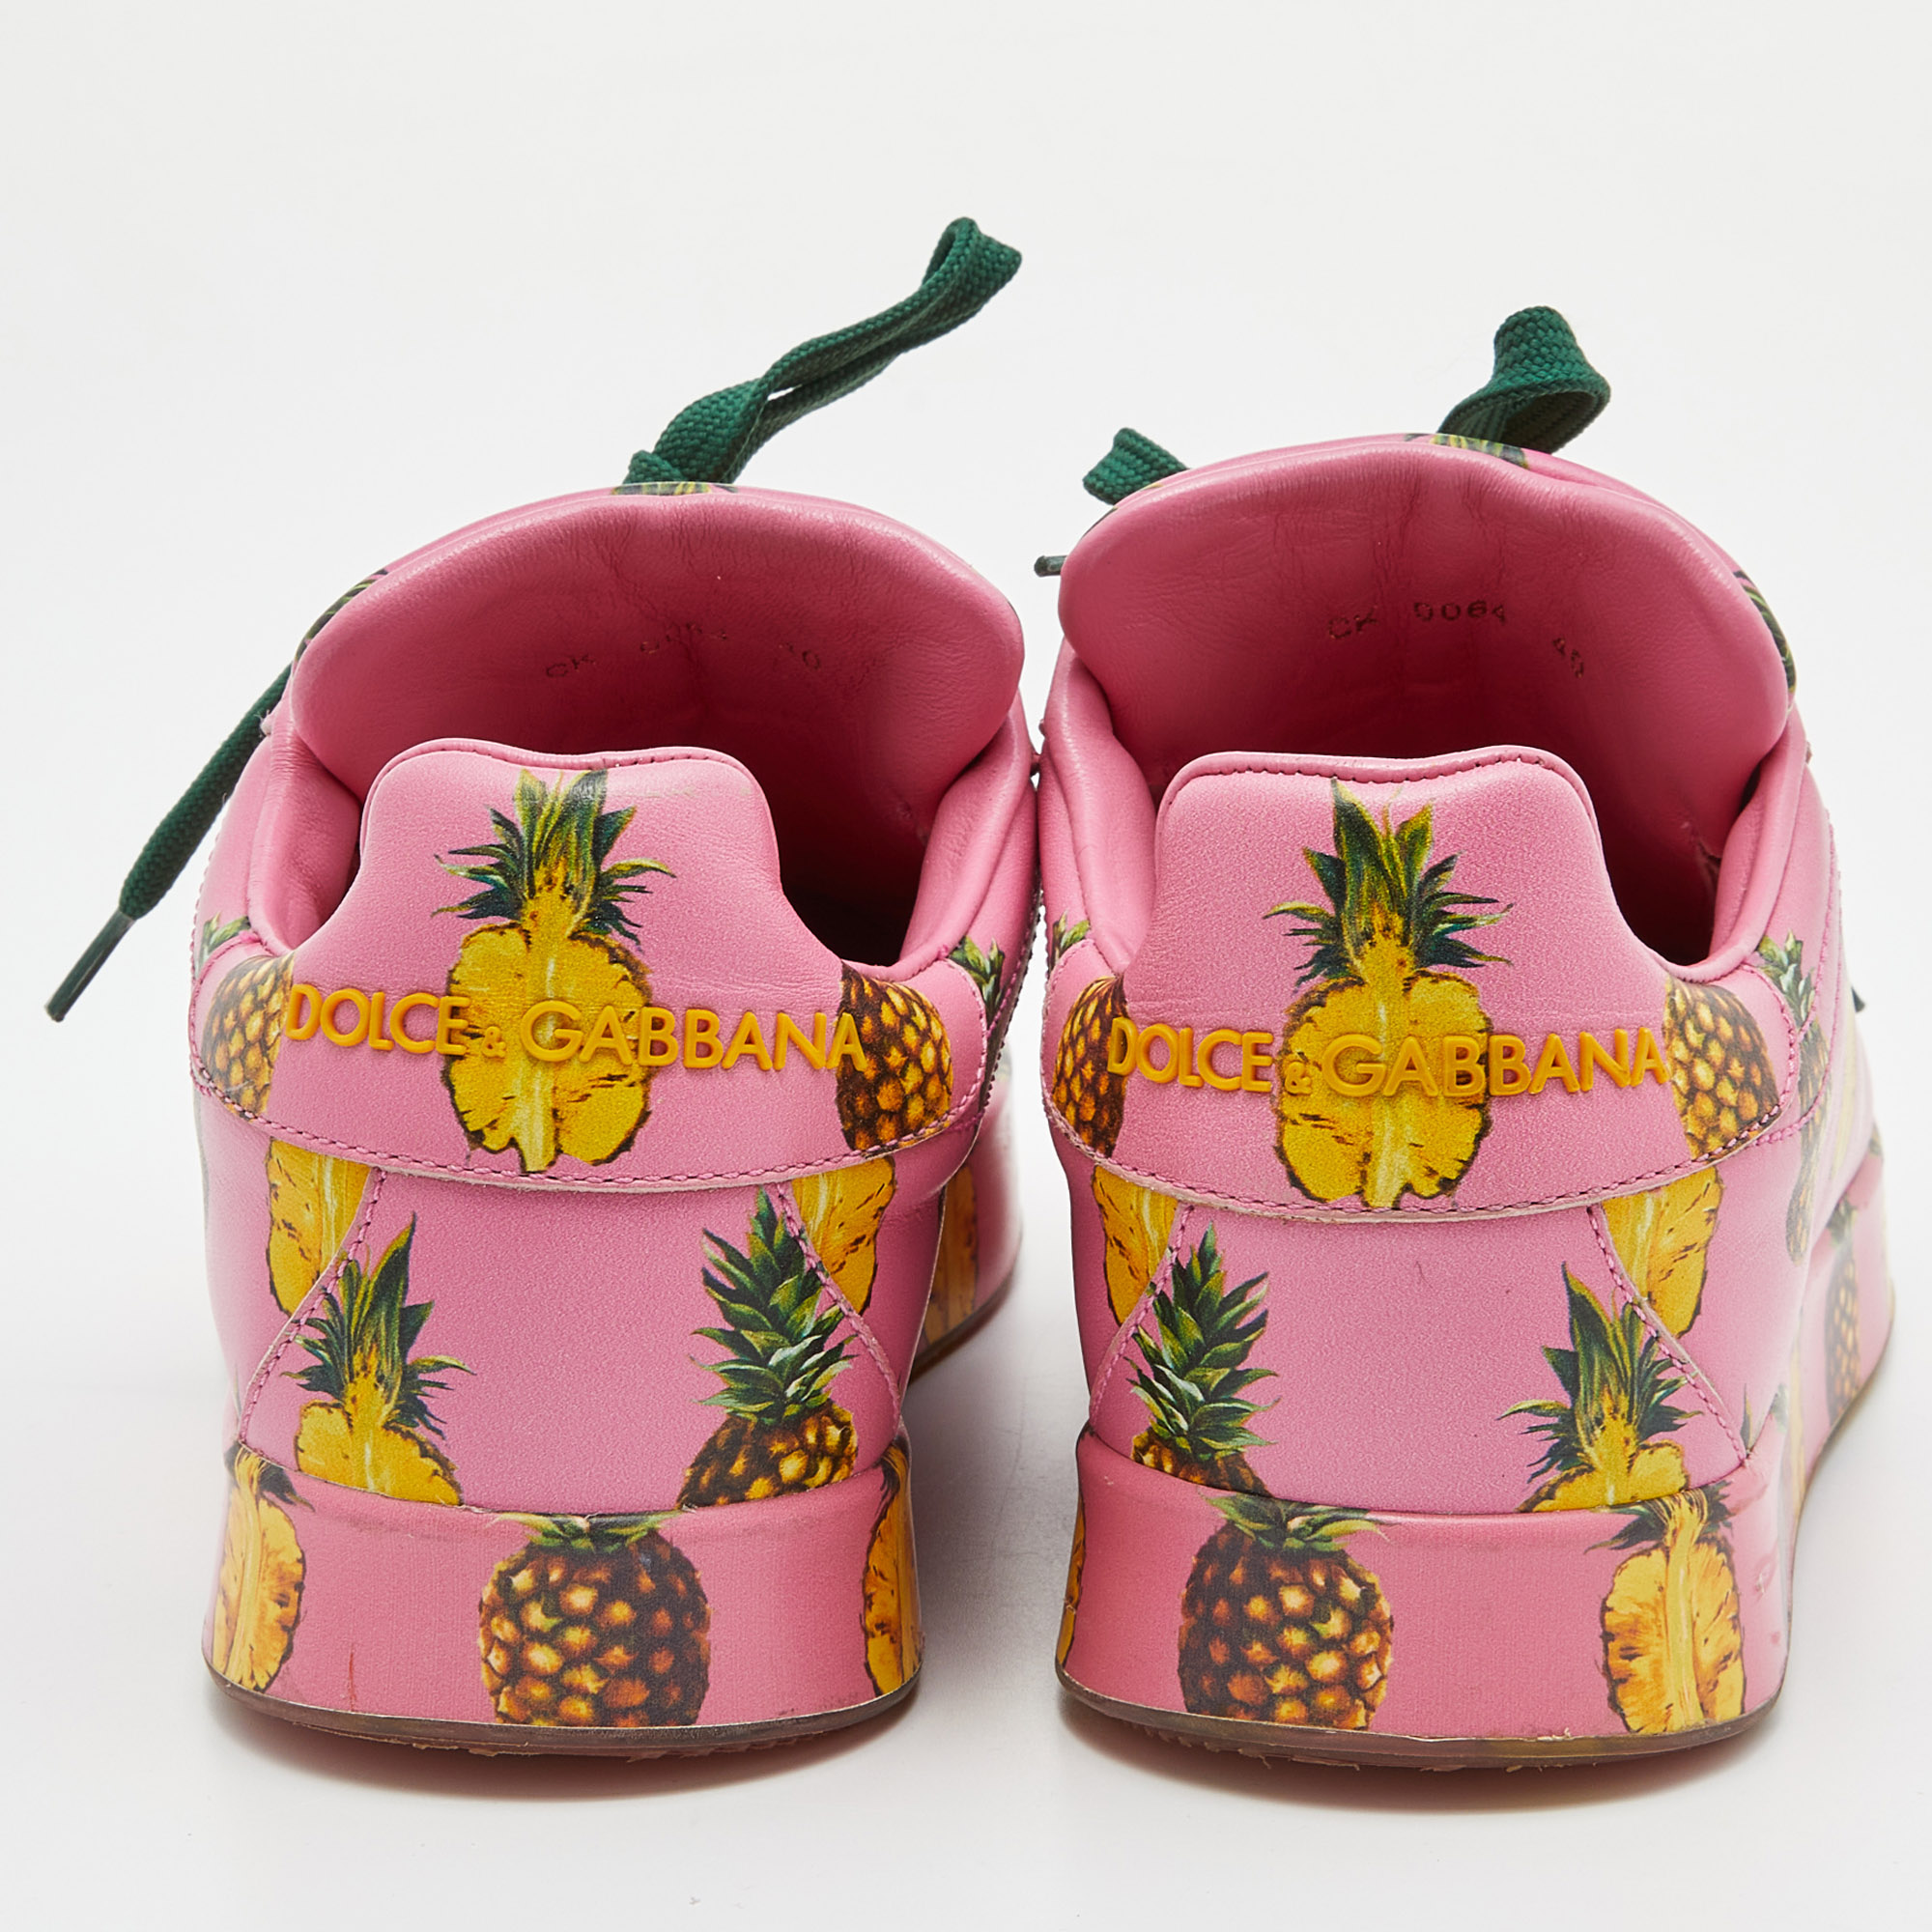 Dolce & Gabbana Pink Pineapple Print Leather Low Top Sneakers Size 40